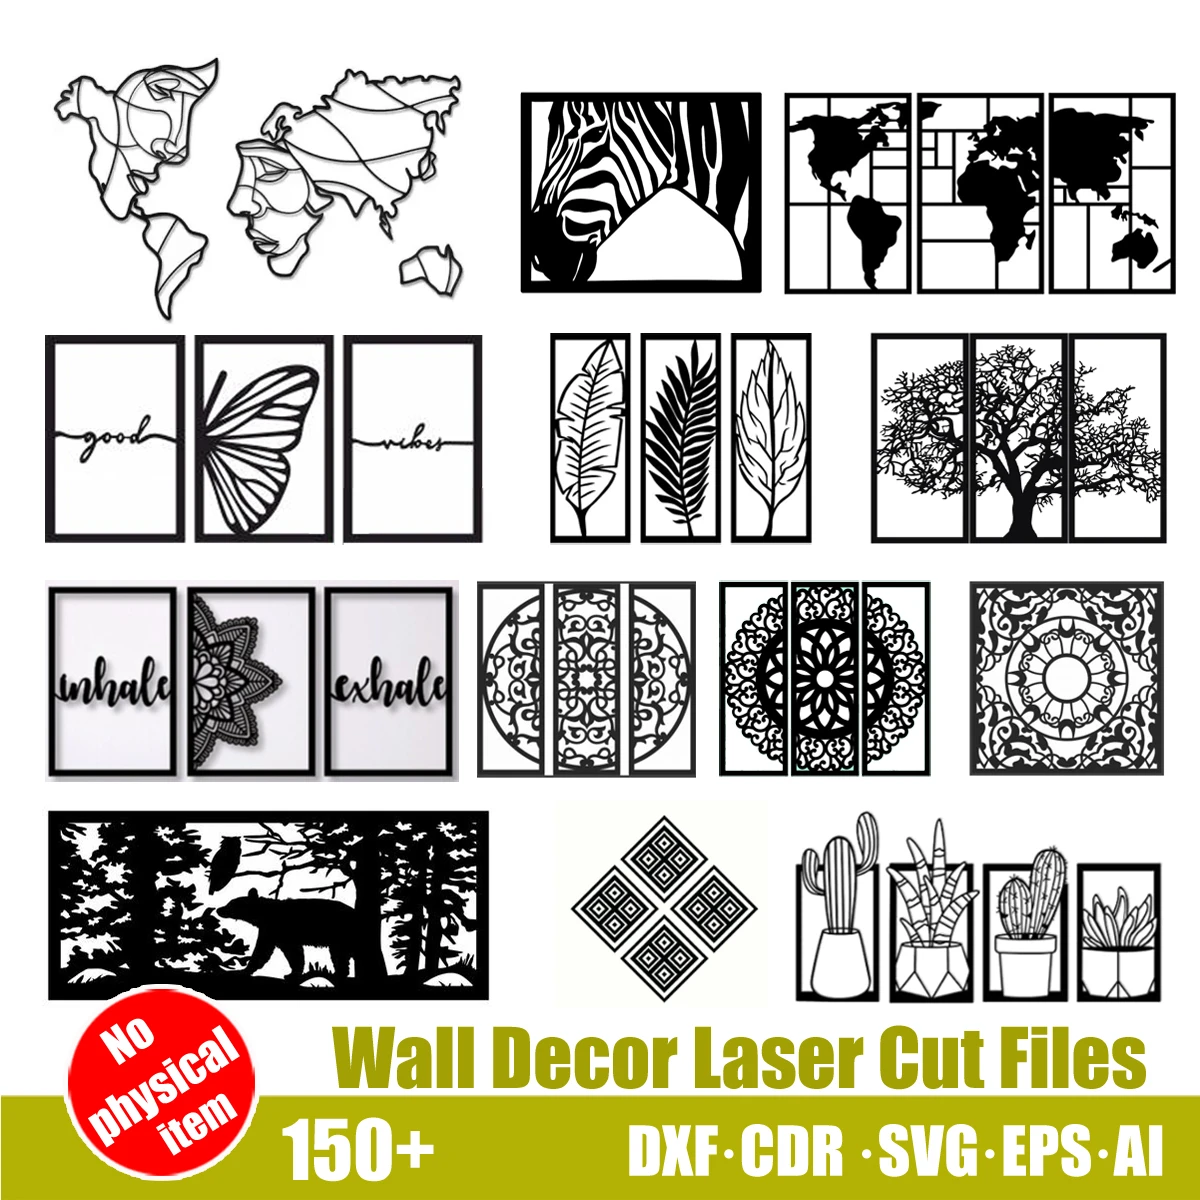 wall mounted woodworking bench 150+ Nordic Wall Décor Designs Templates SVG, DXF, CDR, EPS, AI Files for Laser or Plasma Cutting and Printing wood pellet mill for sale